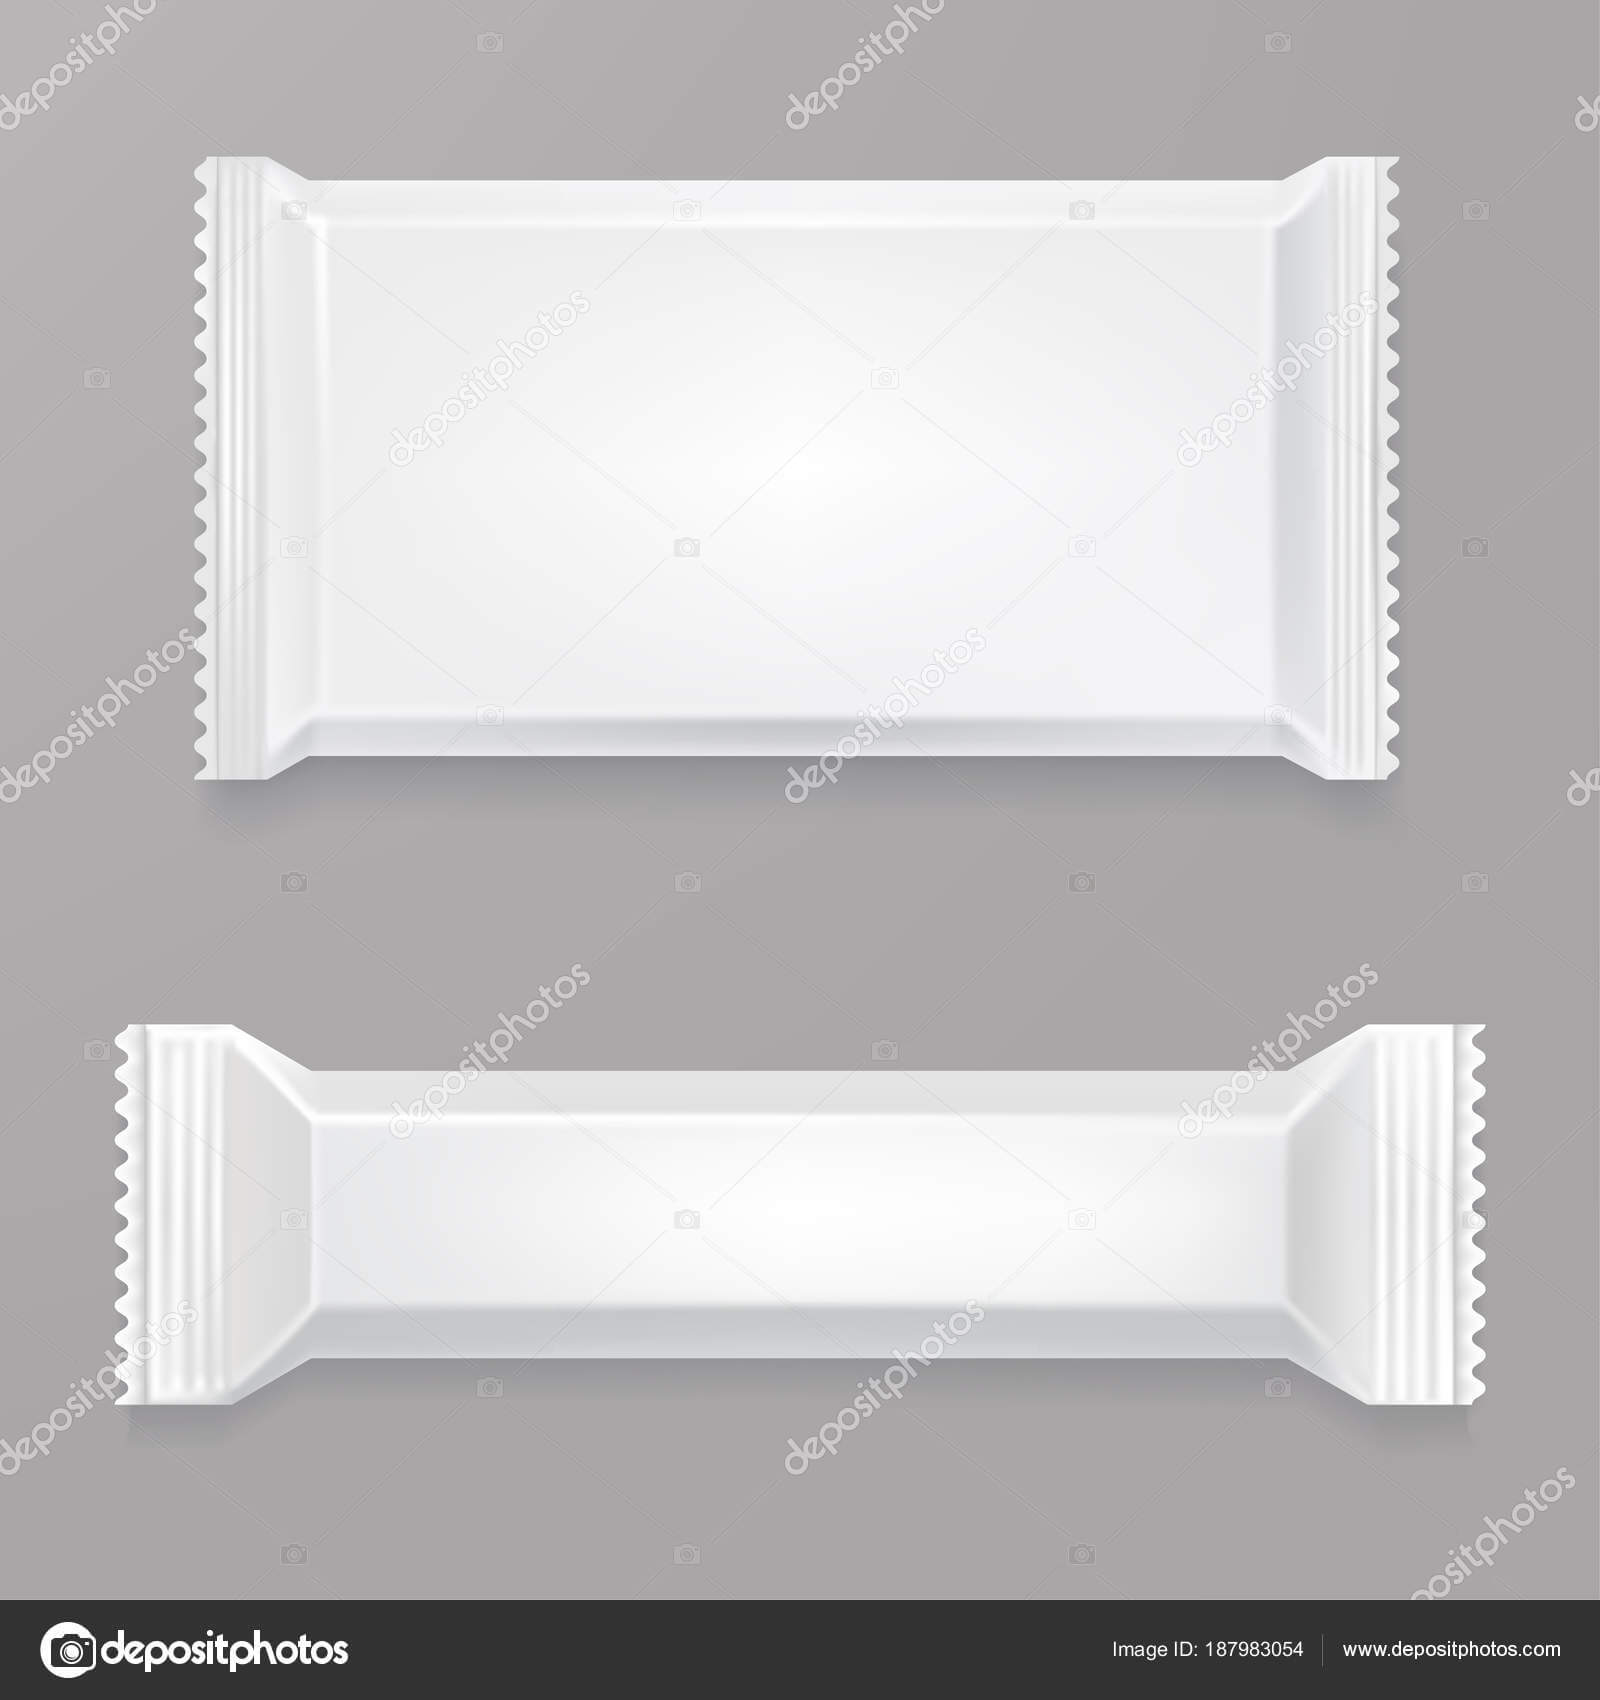 White Blank Chocolate Bar Mockup. White Polyethylene Package In Blank Candy Bar Wrapper Template